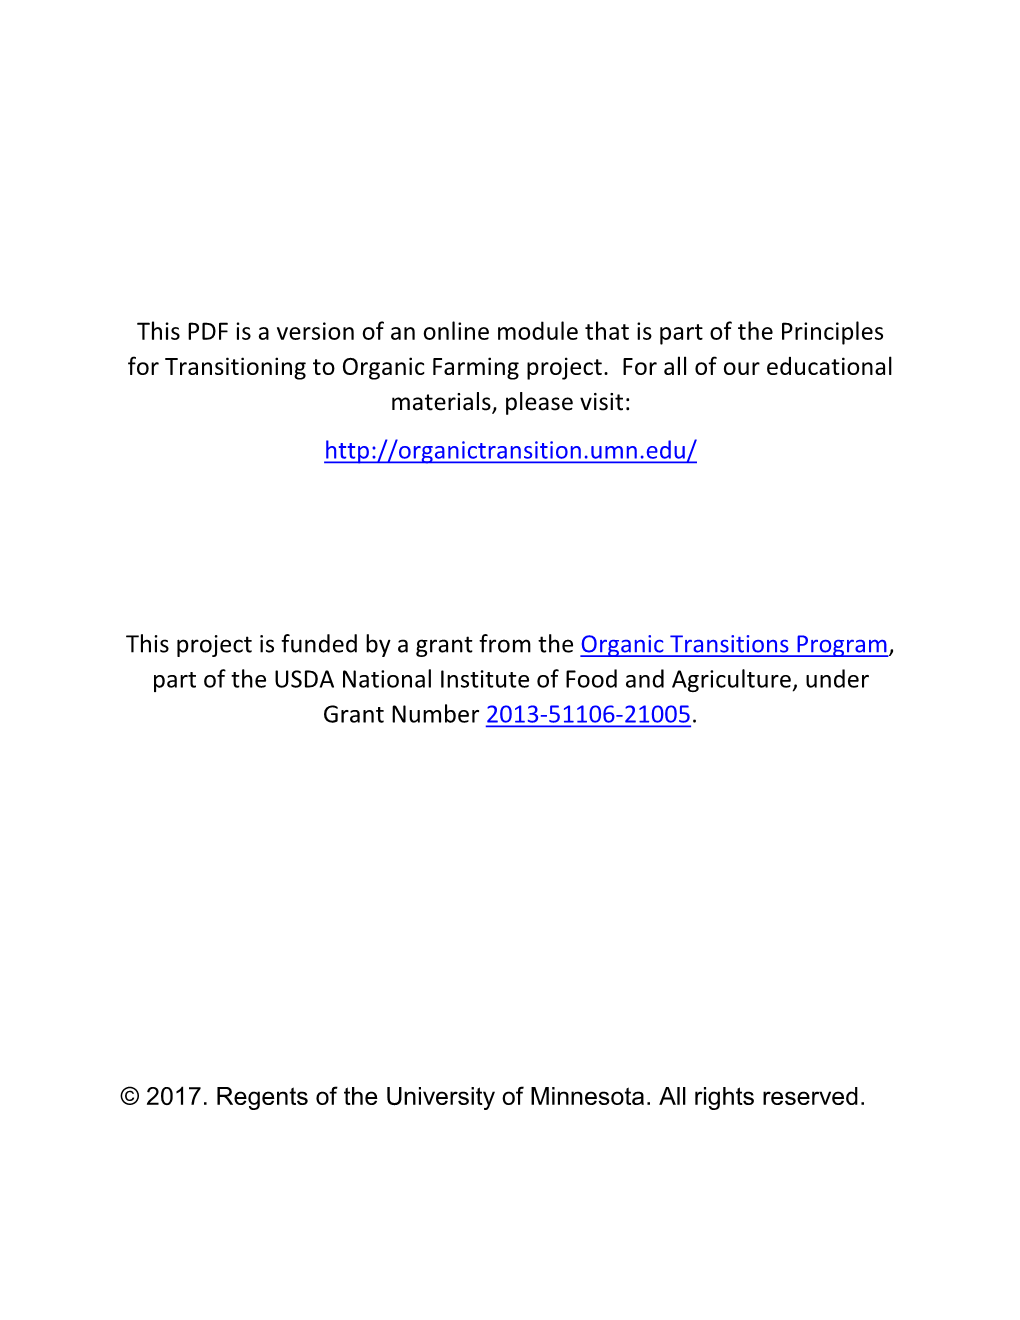 This PDF Is a Version of an Online Module That Is Part of the Principles for Transitioning to Organic Farming Project